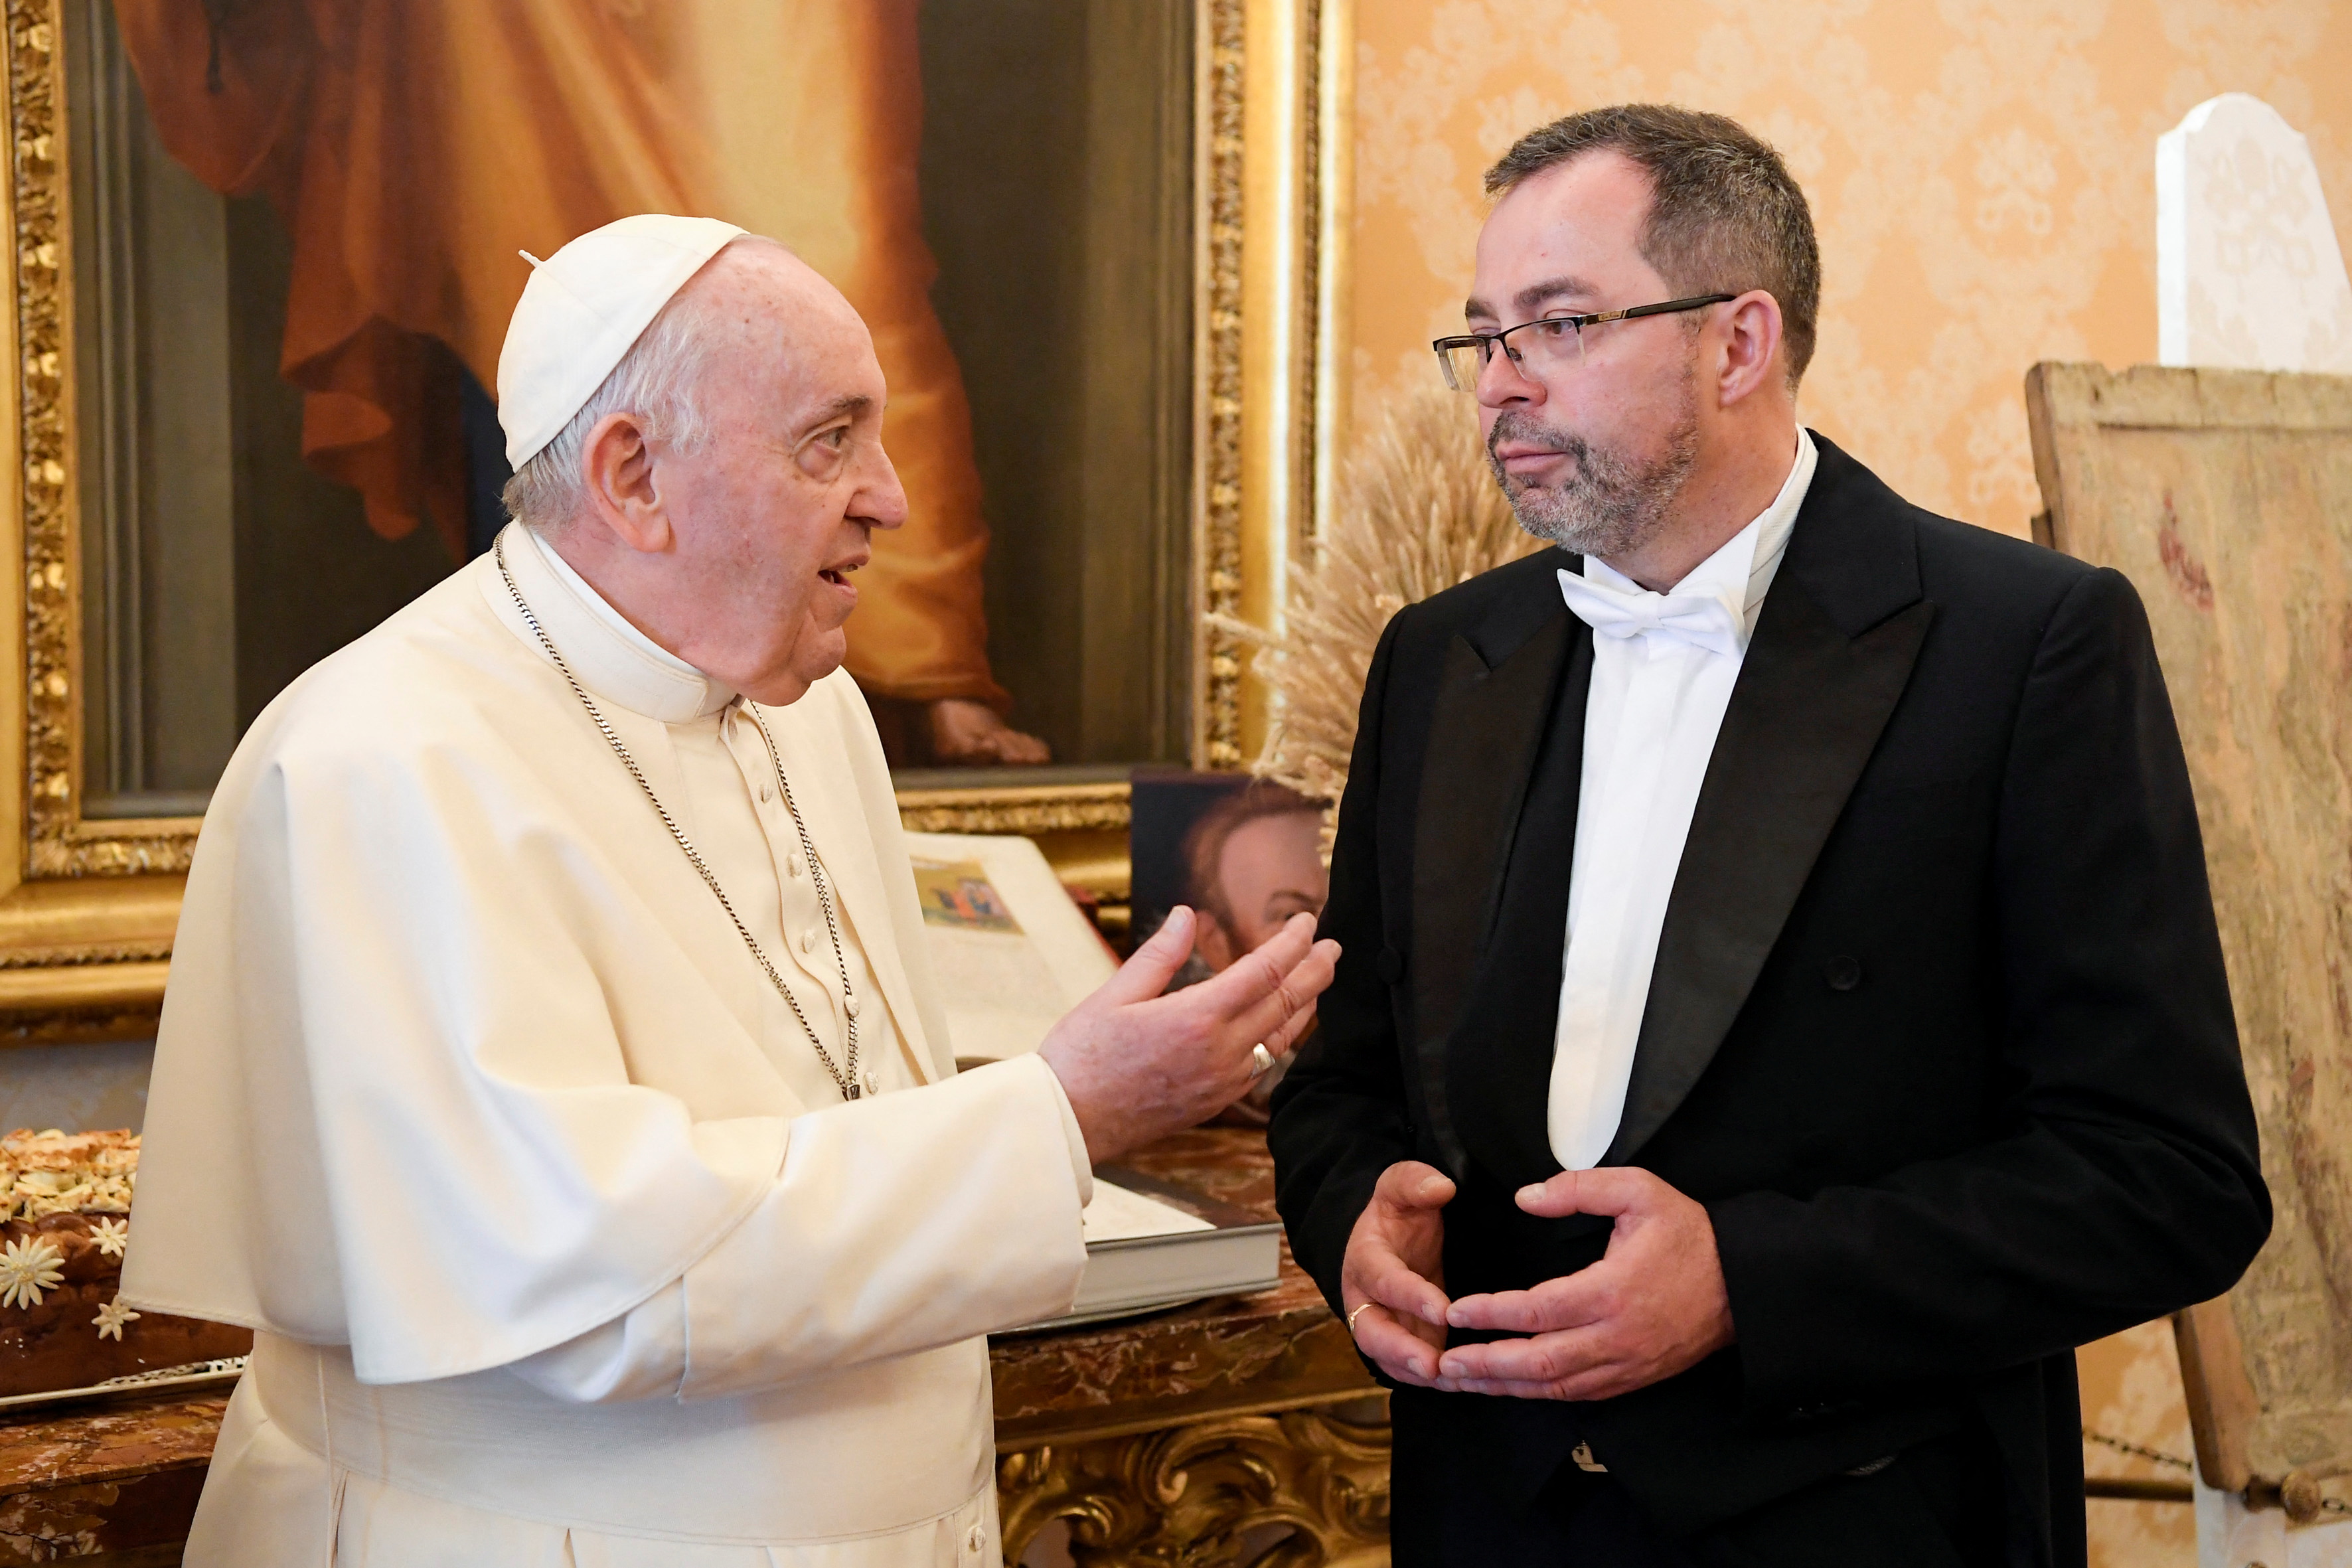 Pope Francis meets with Ukraine's ambassador to the Vatican, Andriy Yurash during a private audience at the Vatican